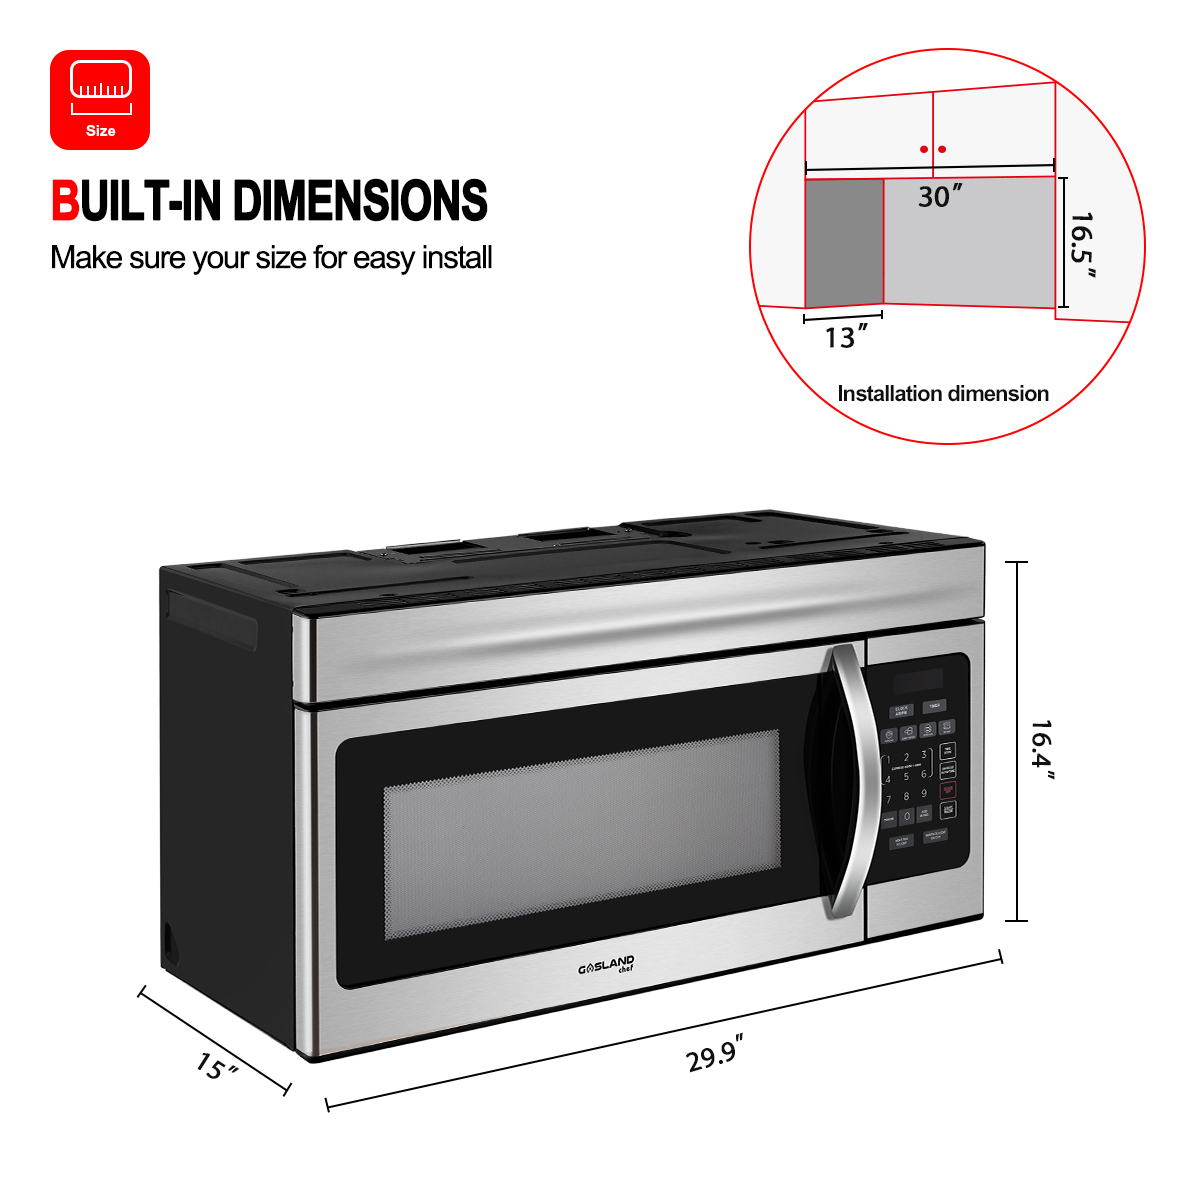 GASLAND Chef 30" over-the-Range Microwave Oven 1.6 cu.ft., 300 CFM in Stainless Steel - image 2 of 7